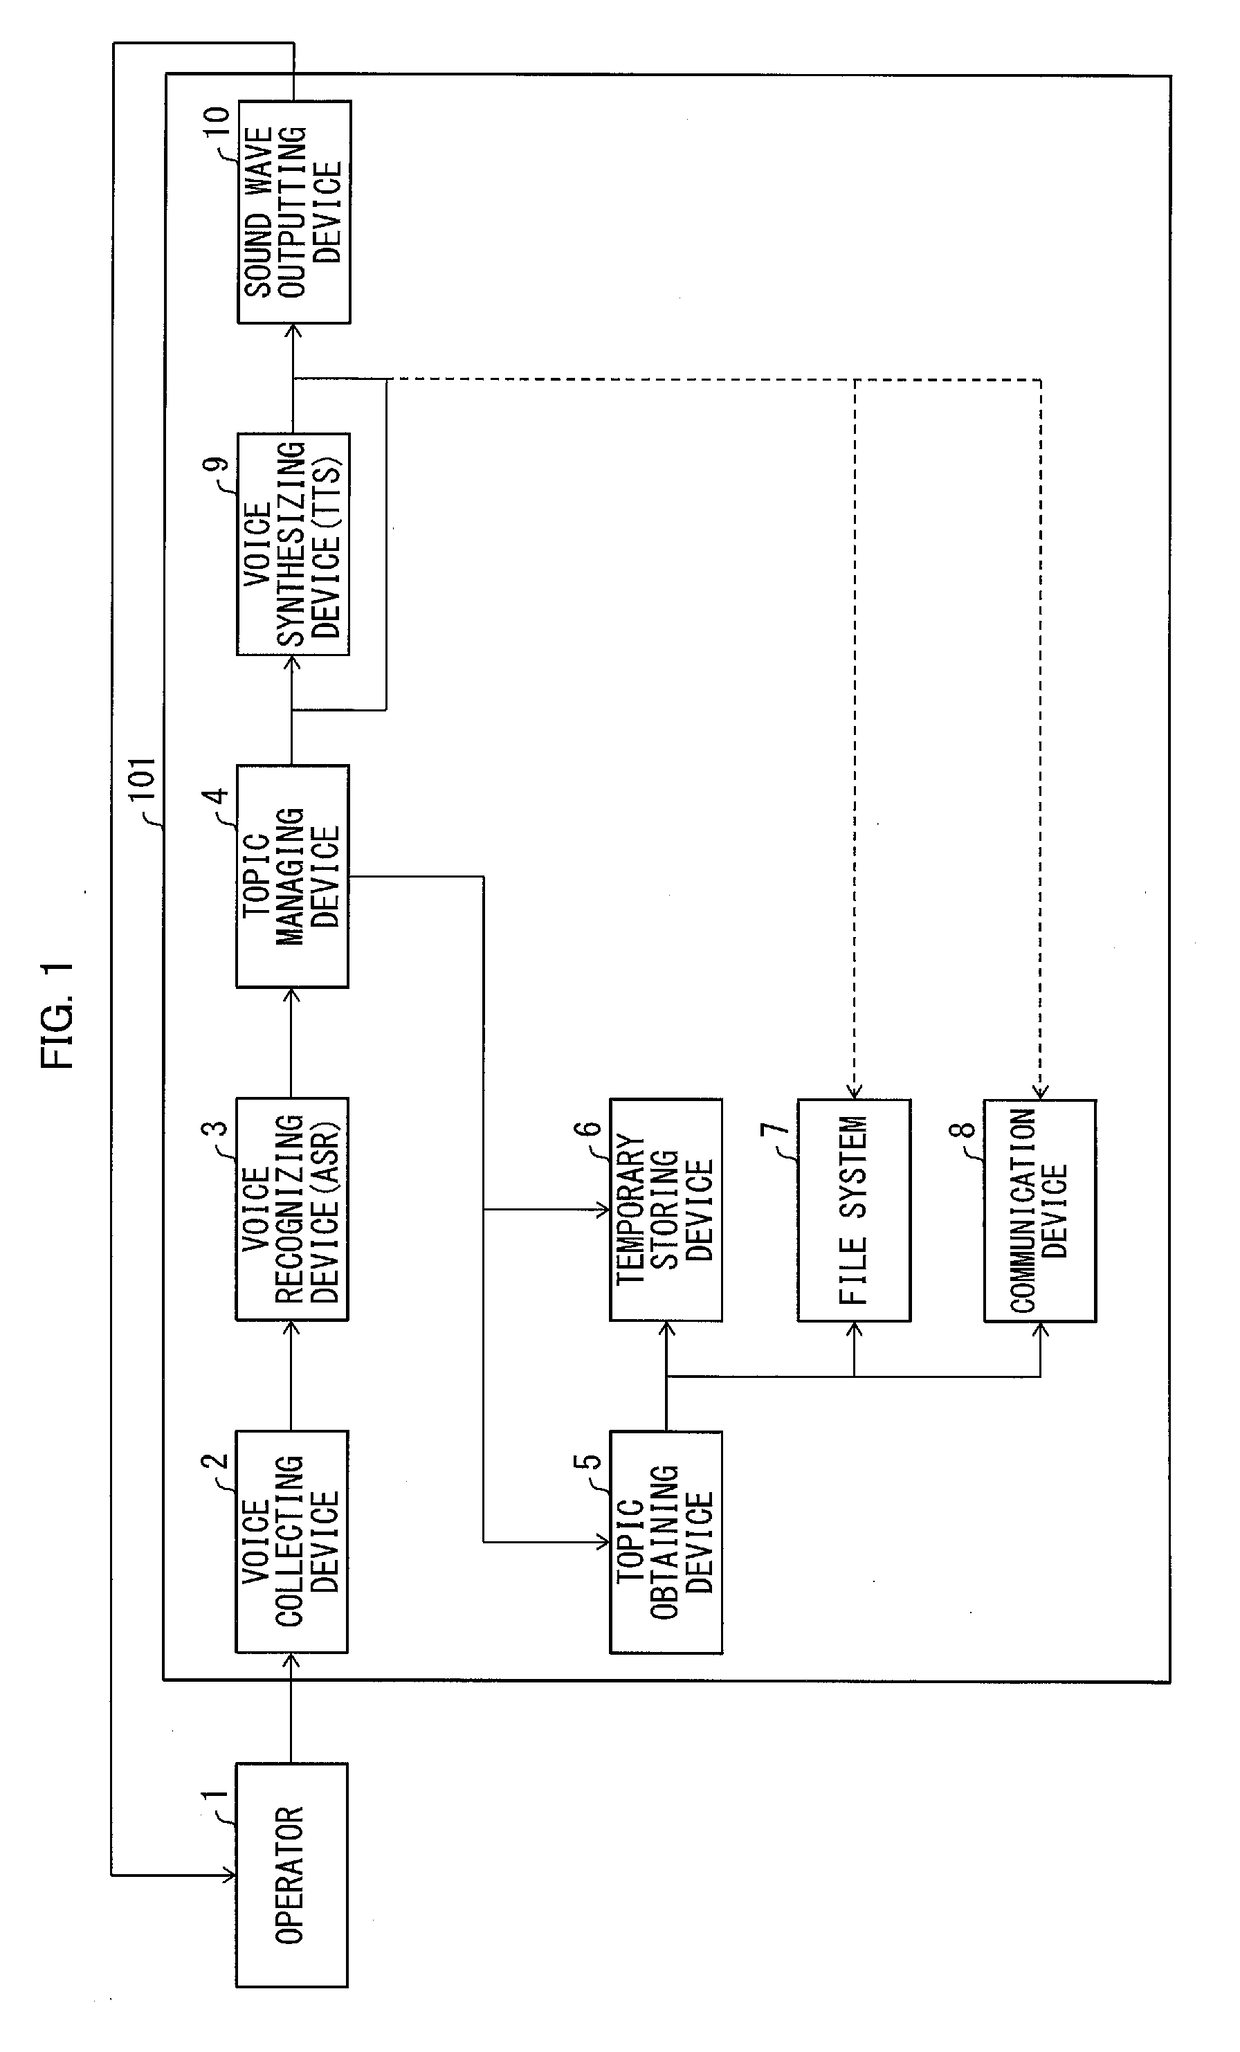 Data structure, interactive voice response device, and electronic device